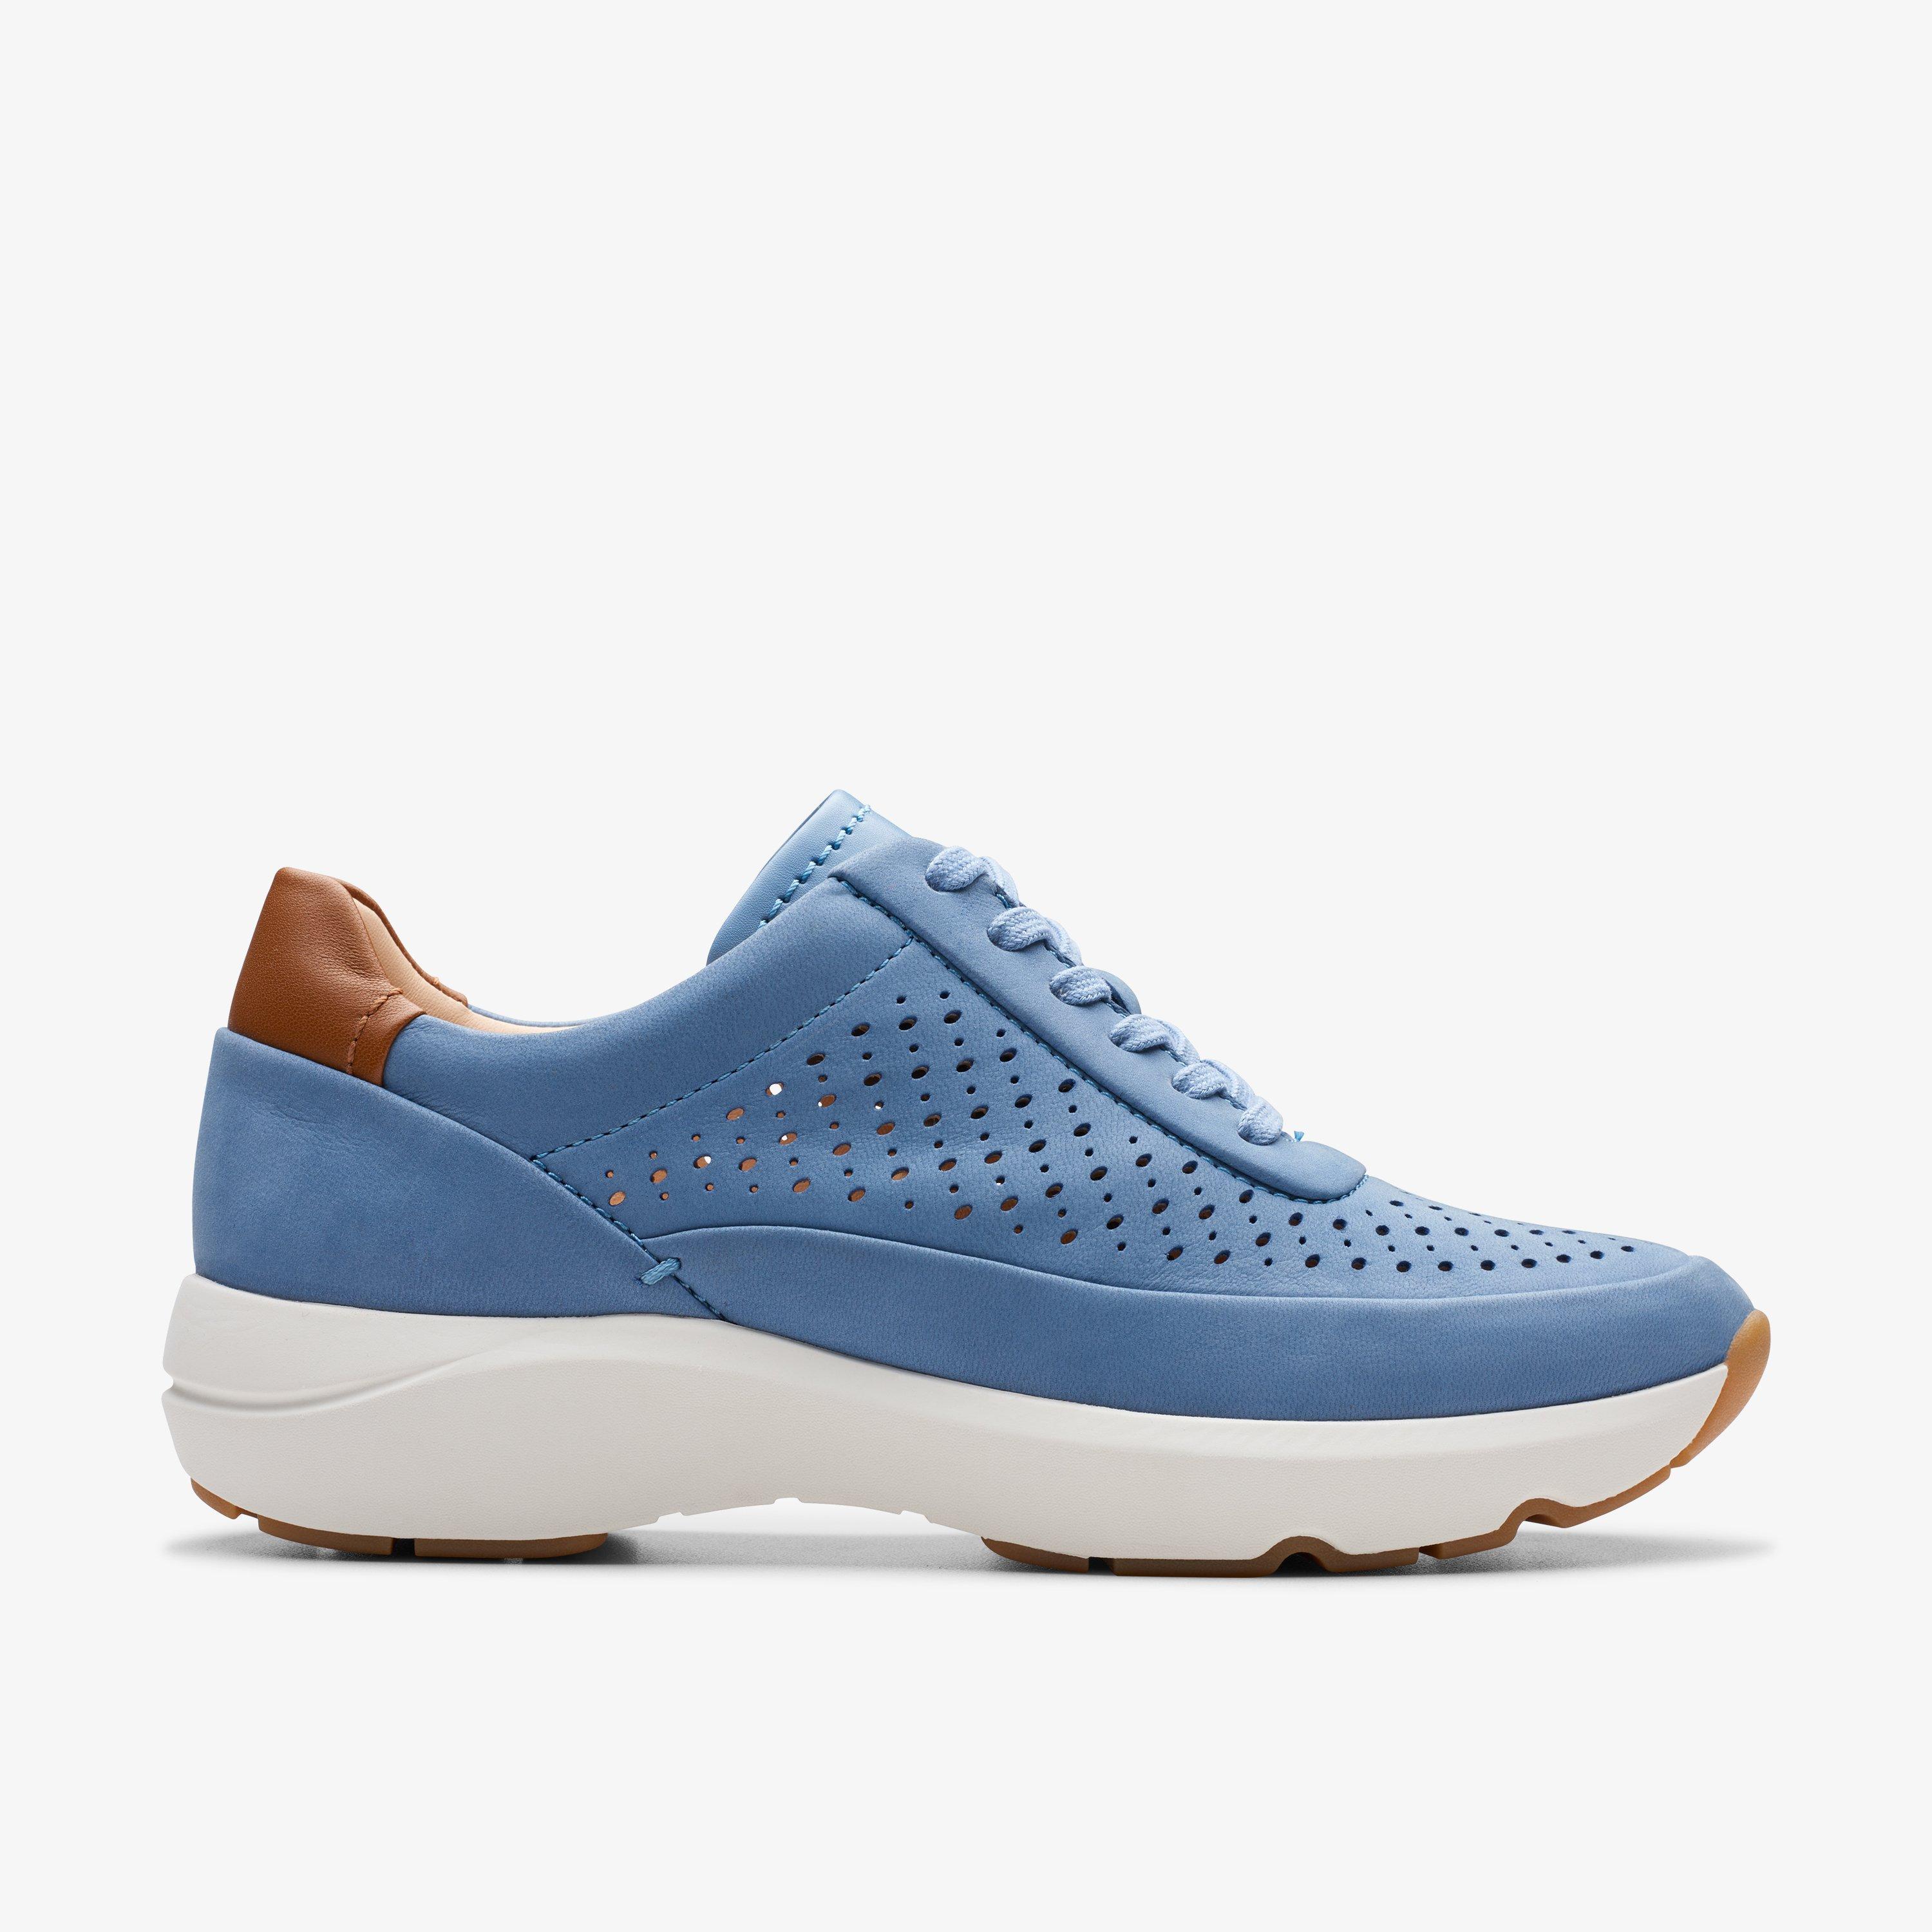 Women's Walking Sneakers & Shoes - Comfort & Arch Support | Clarks CA